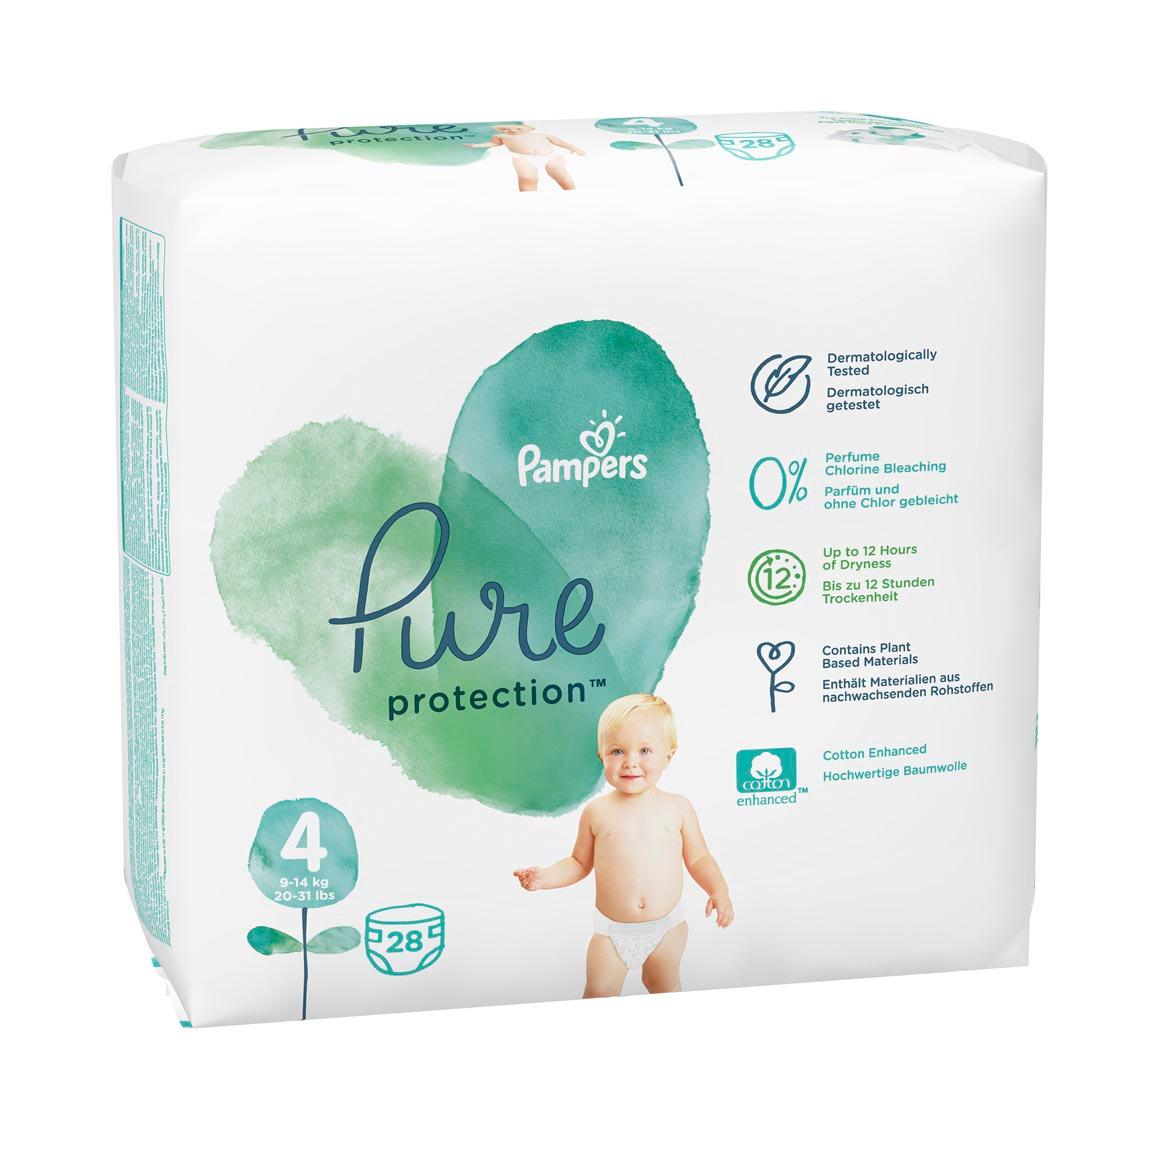 Pure Protection – my review of the new Pampers Pure Collection